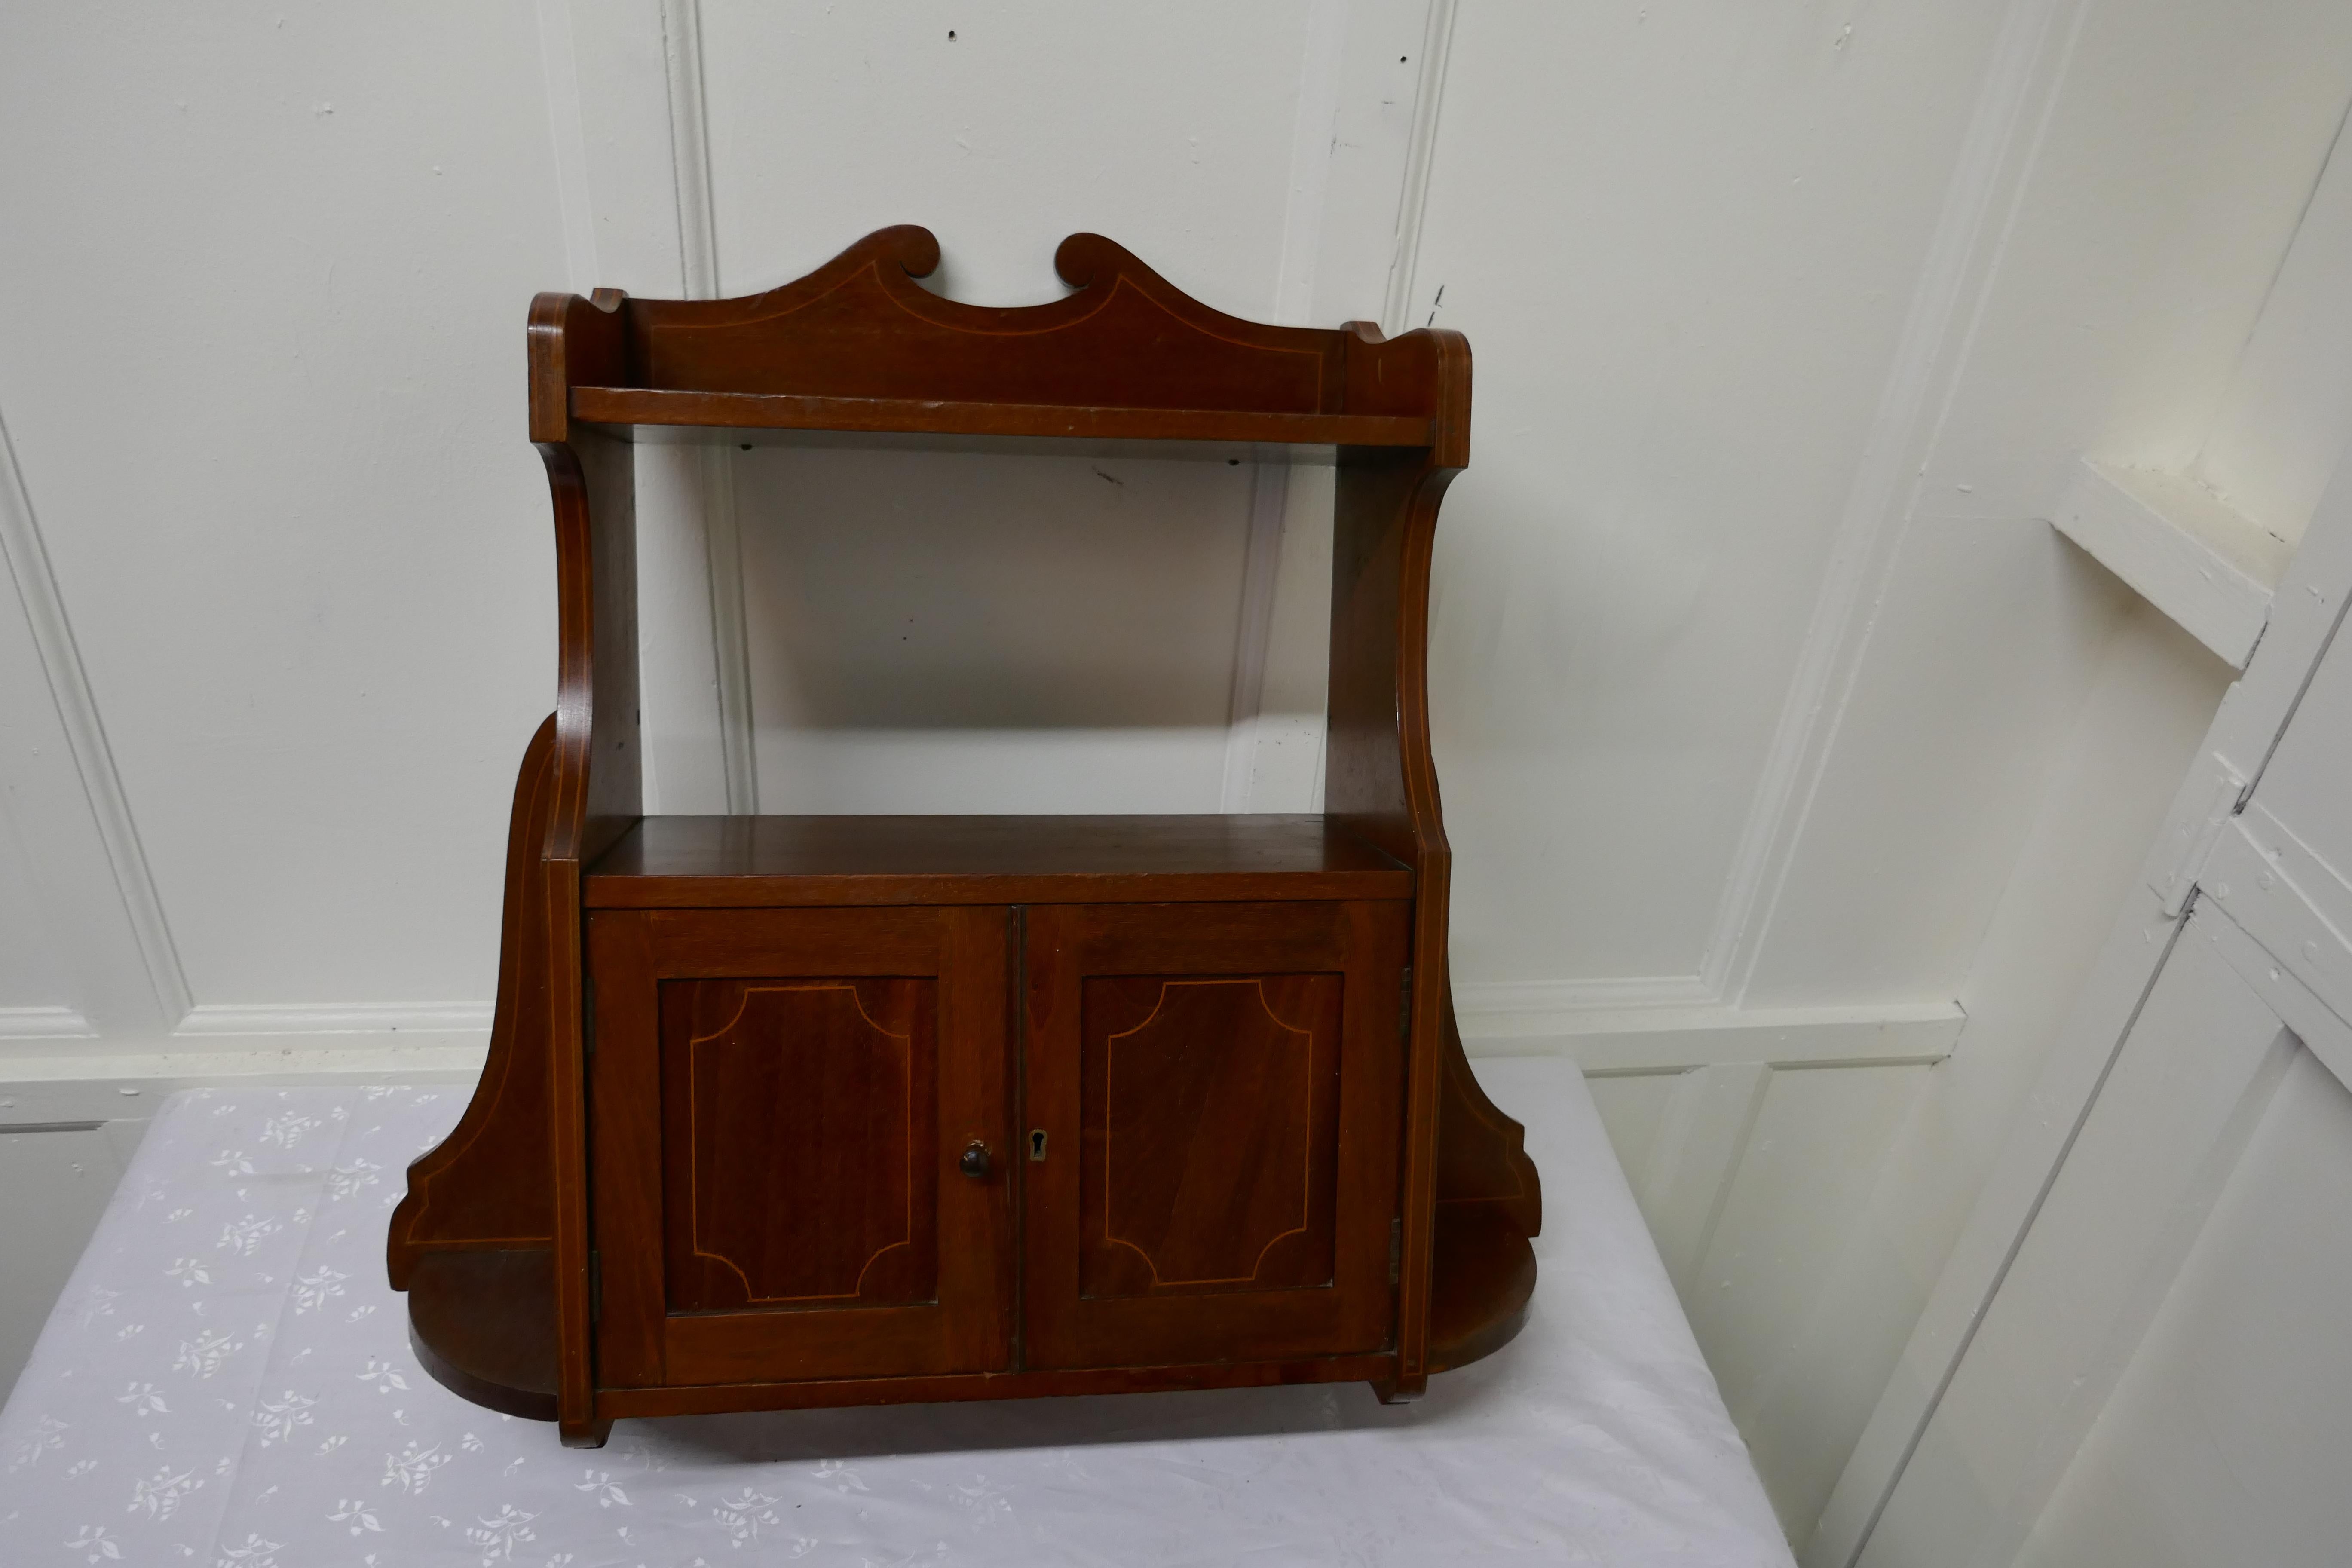 Edwardian mahogany wall cabinet

A great little piece, made in mahogany with a delicate boxwood string inlay on the front, the cabinet has a top galleried shelf and another over the double door cabinet
The interior of the cabinet has some water